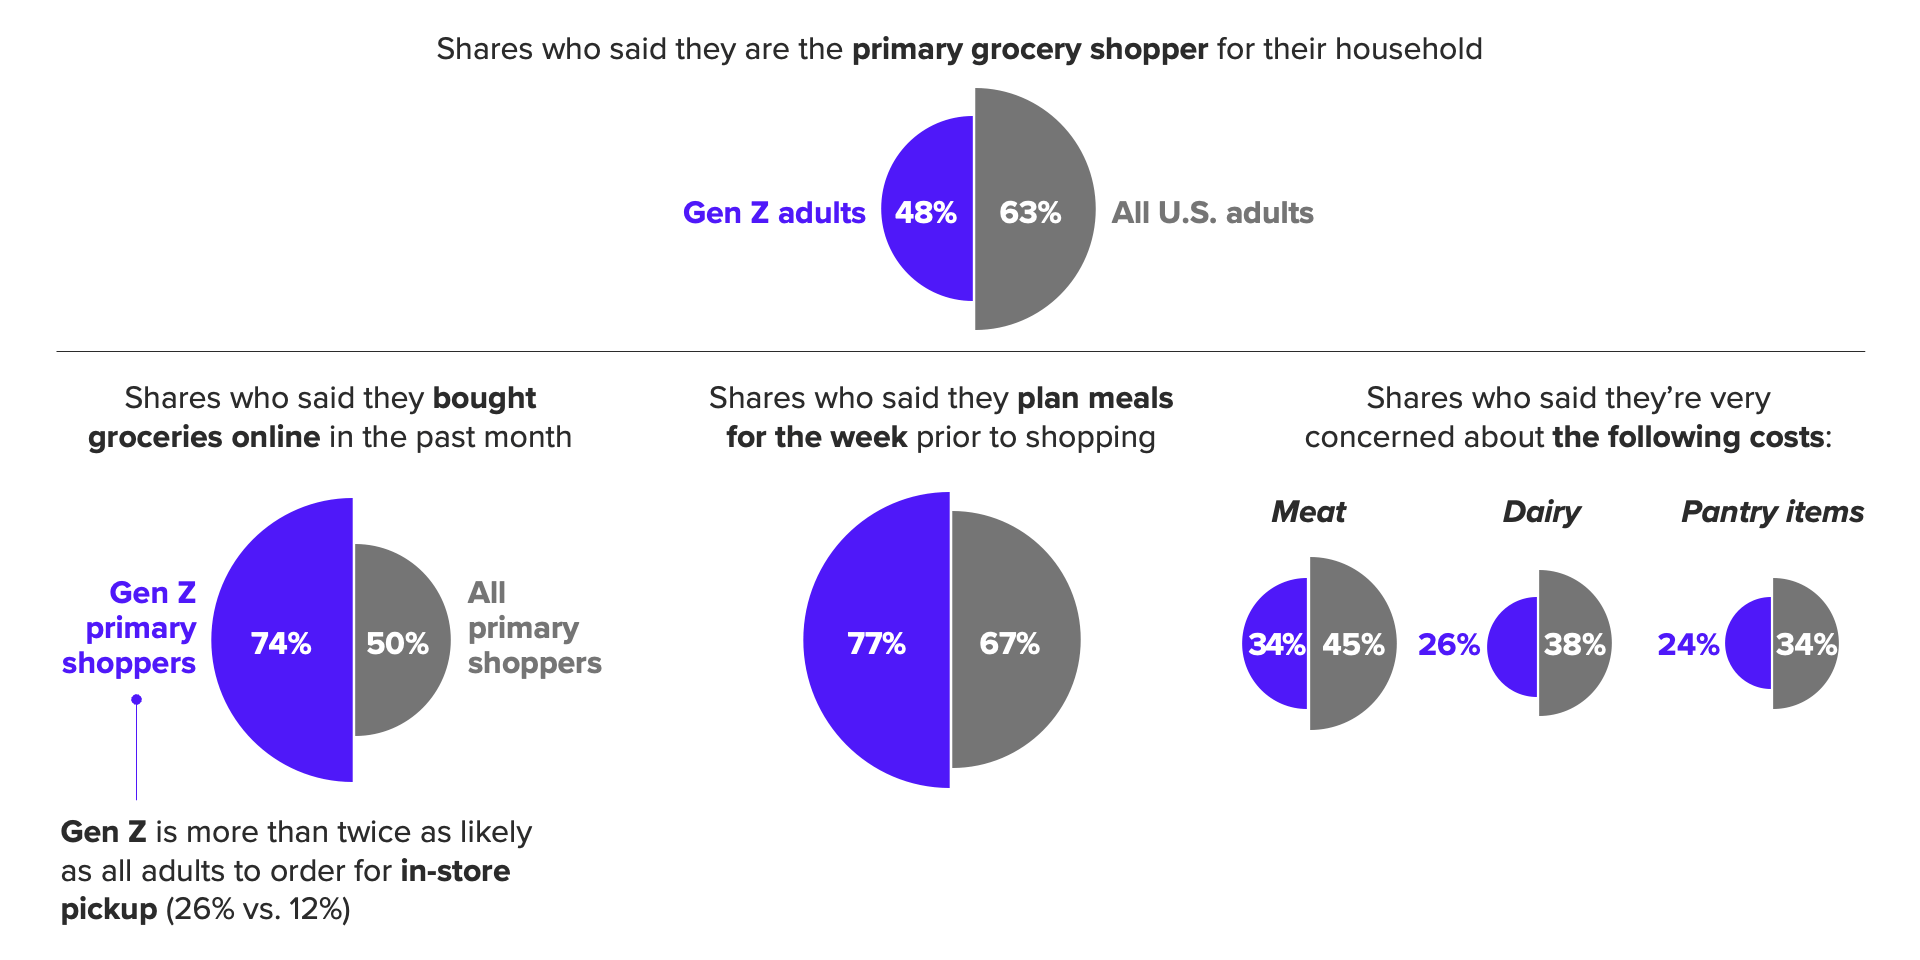 Proportional area chart conveying the Gen Z primary grocery shopper.